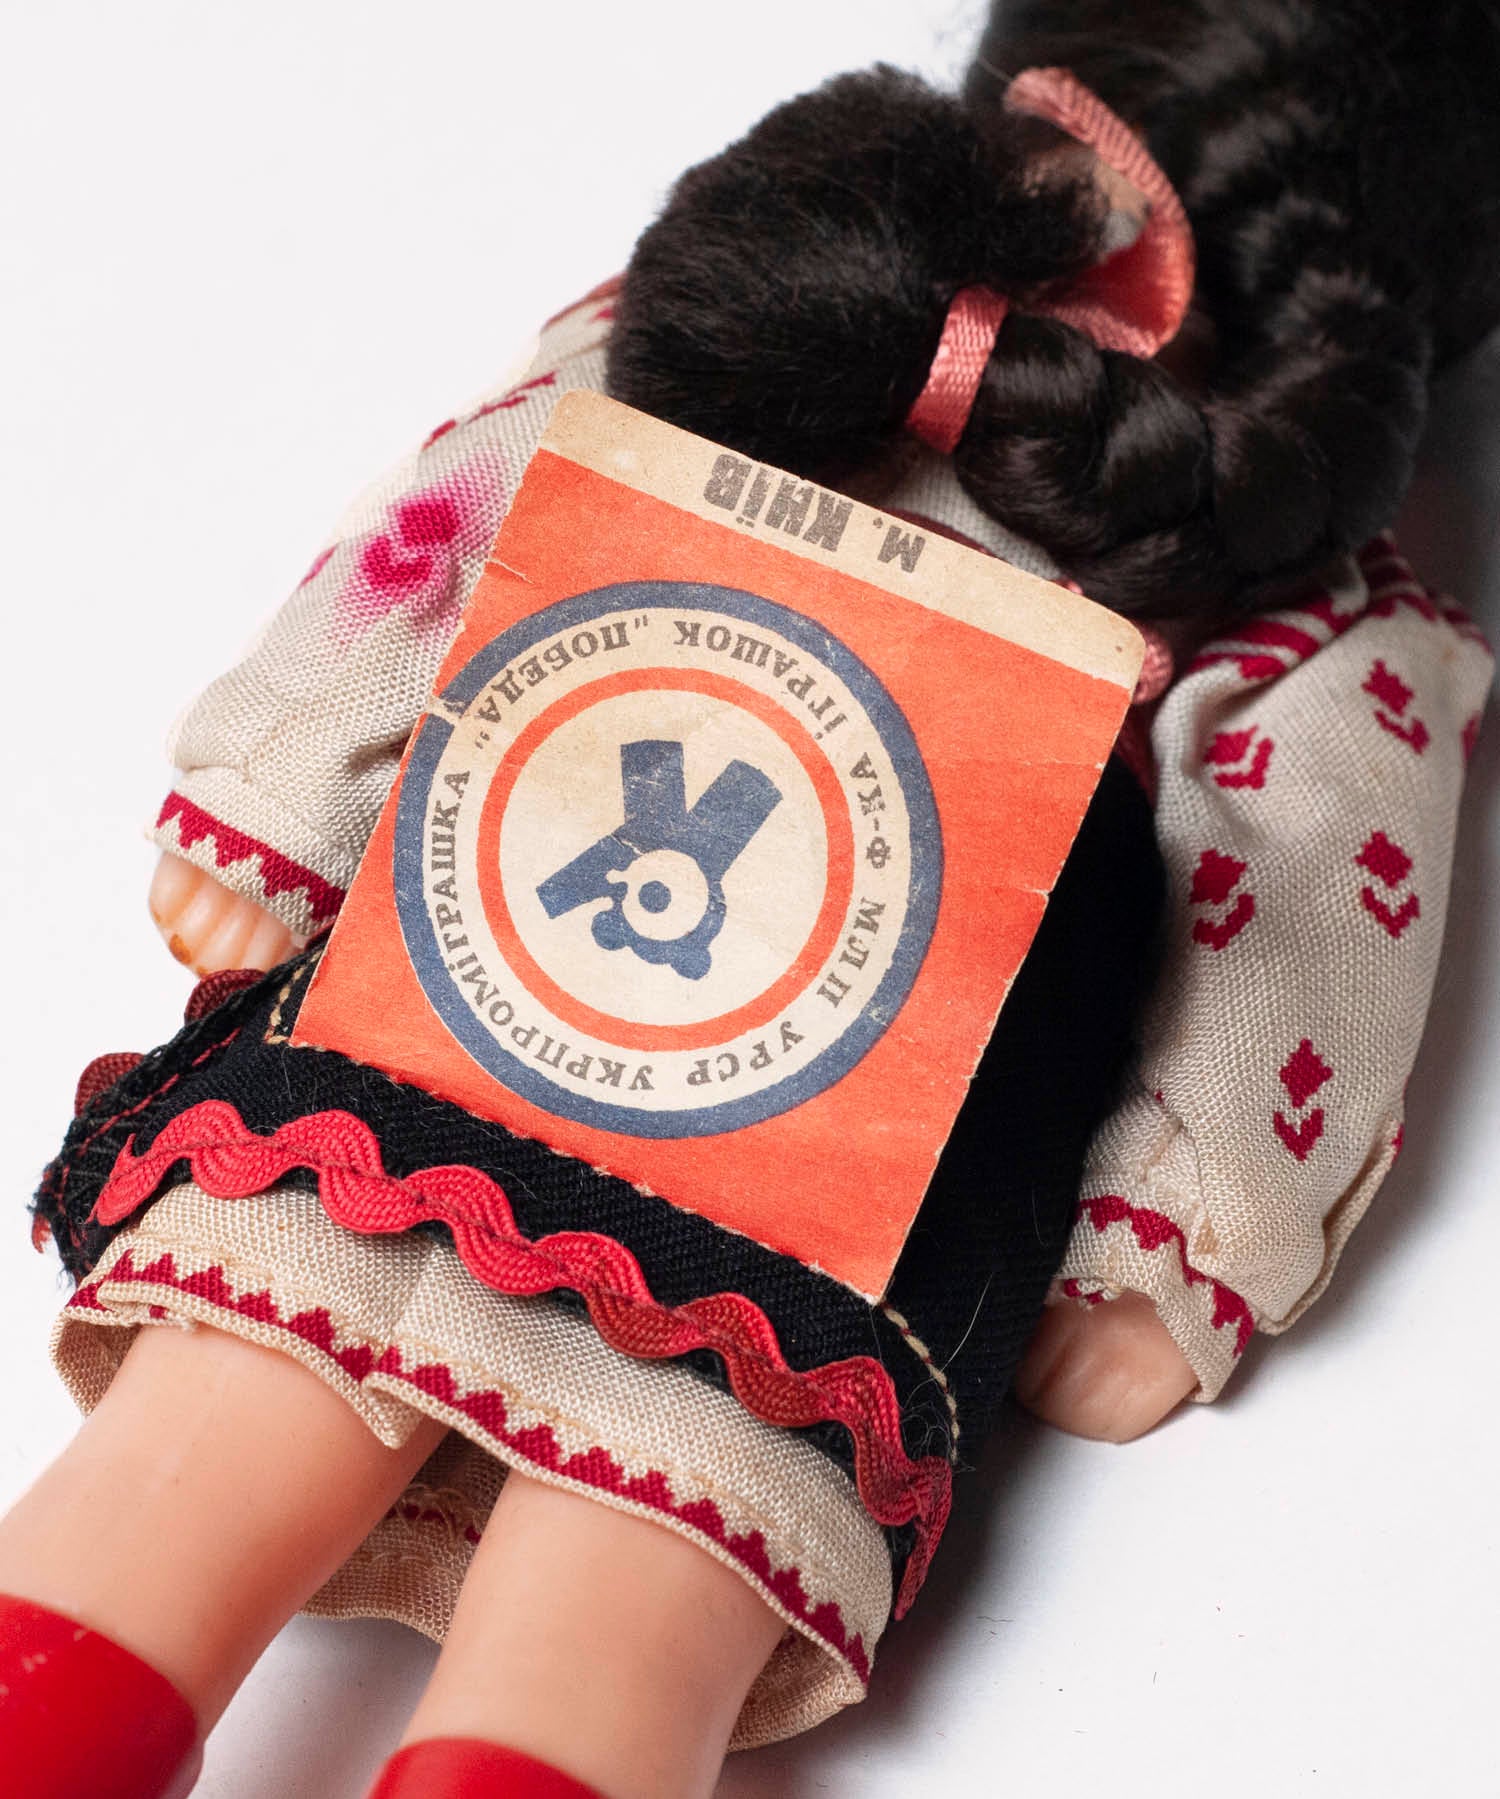 Vintage Object : CCCP Doll | LIKE THIS SHOP